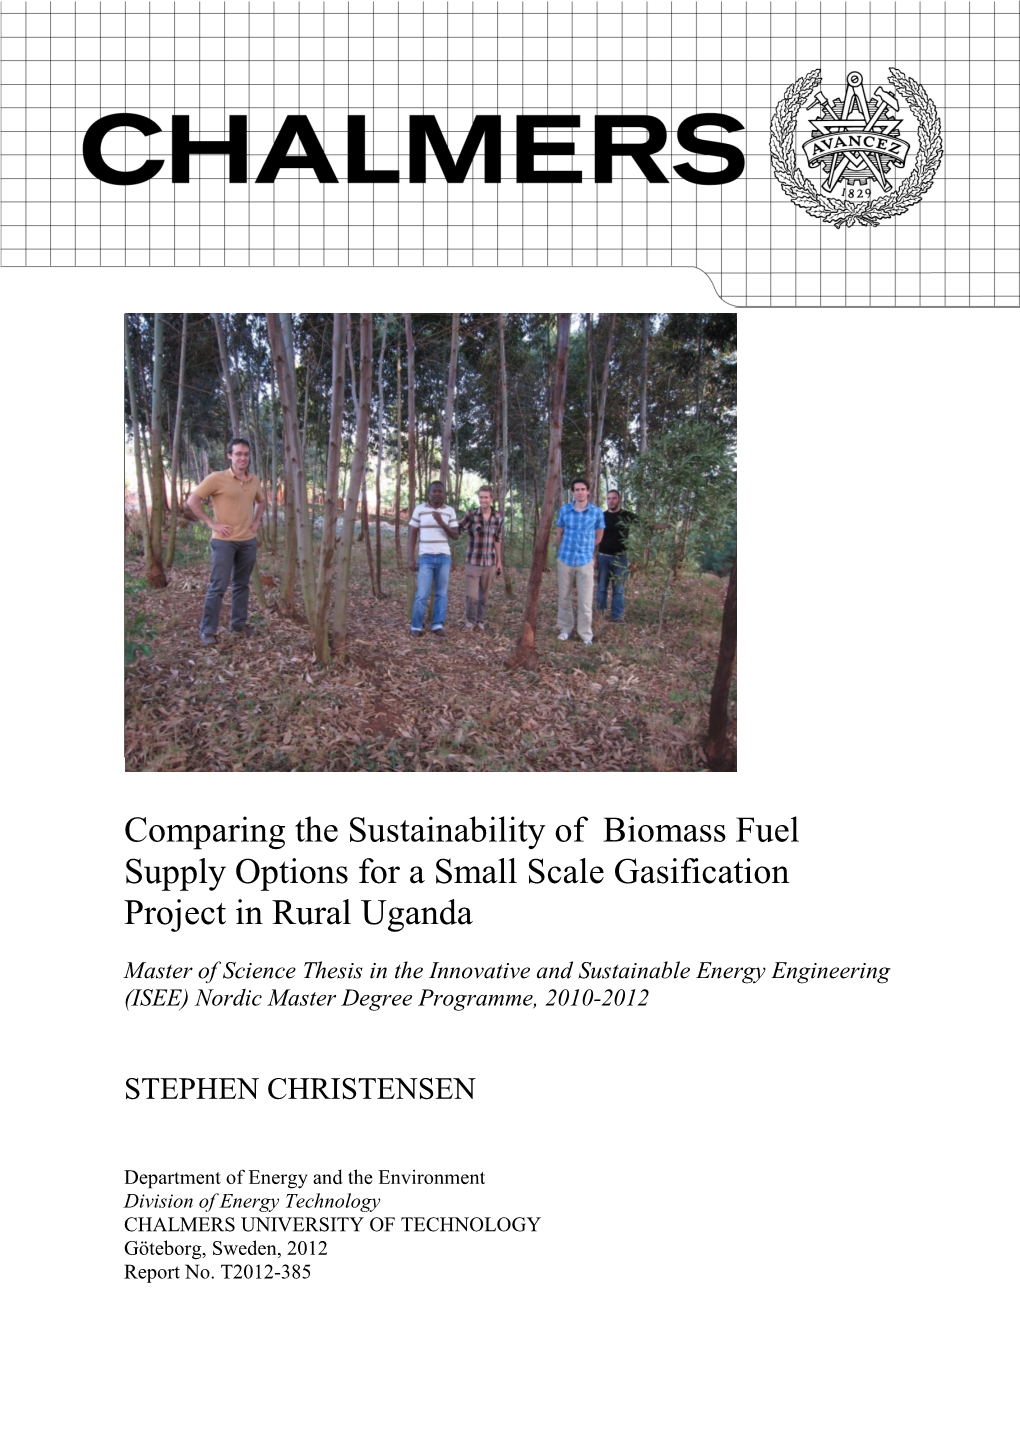 Comparing the Sustainability of Biomass Fuel Supply Options for a Small Scale Gasification Project in Rural Uganda